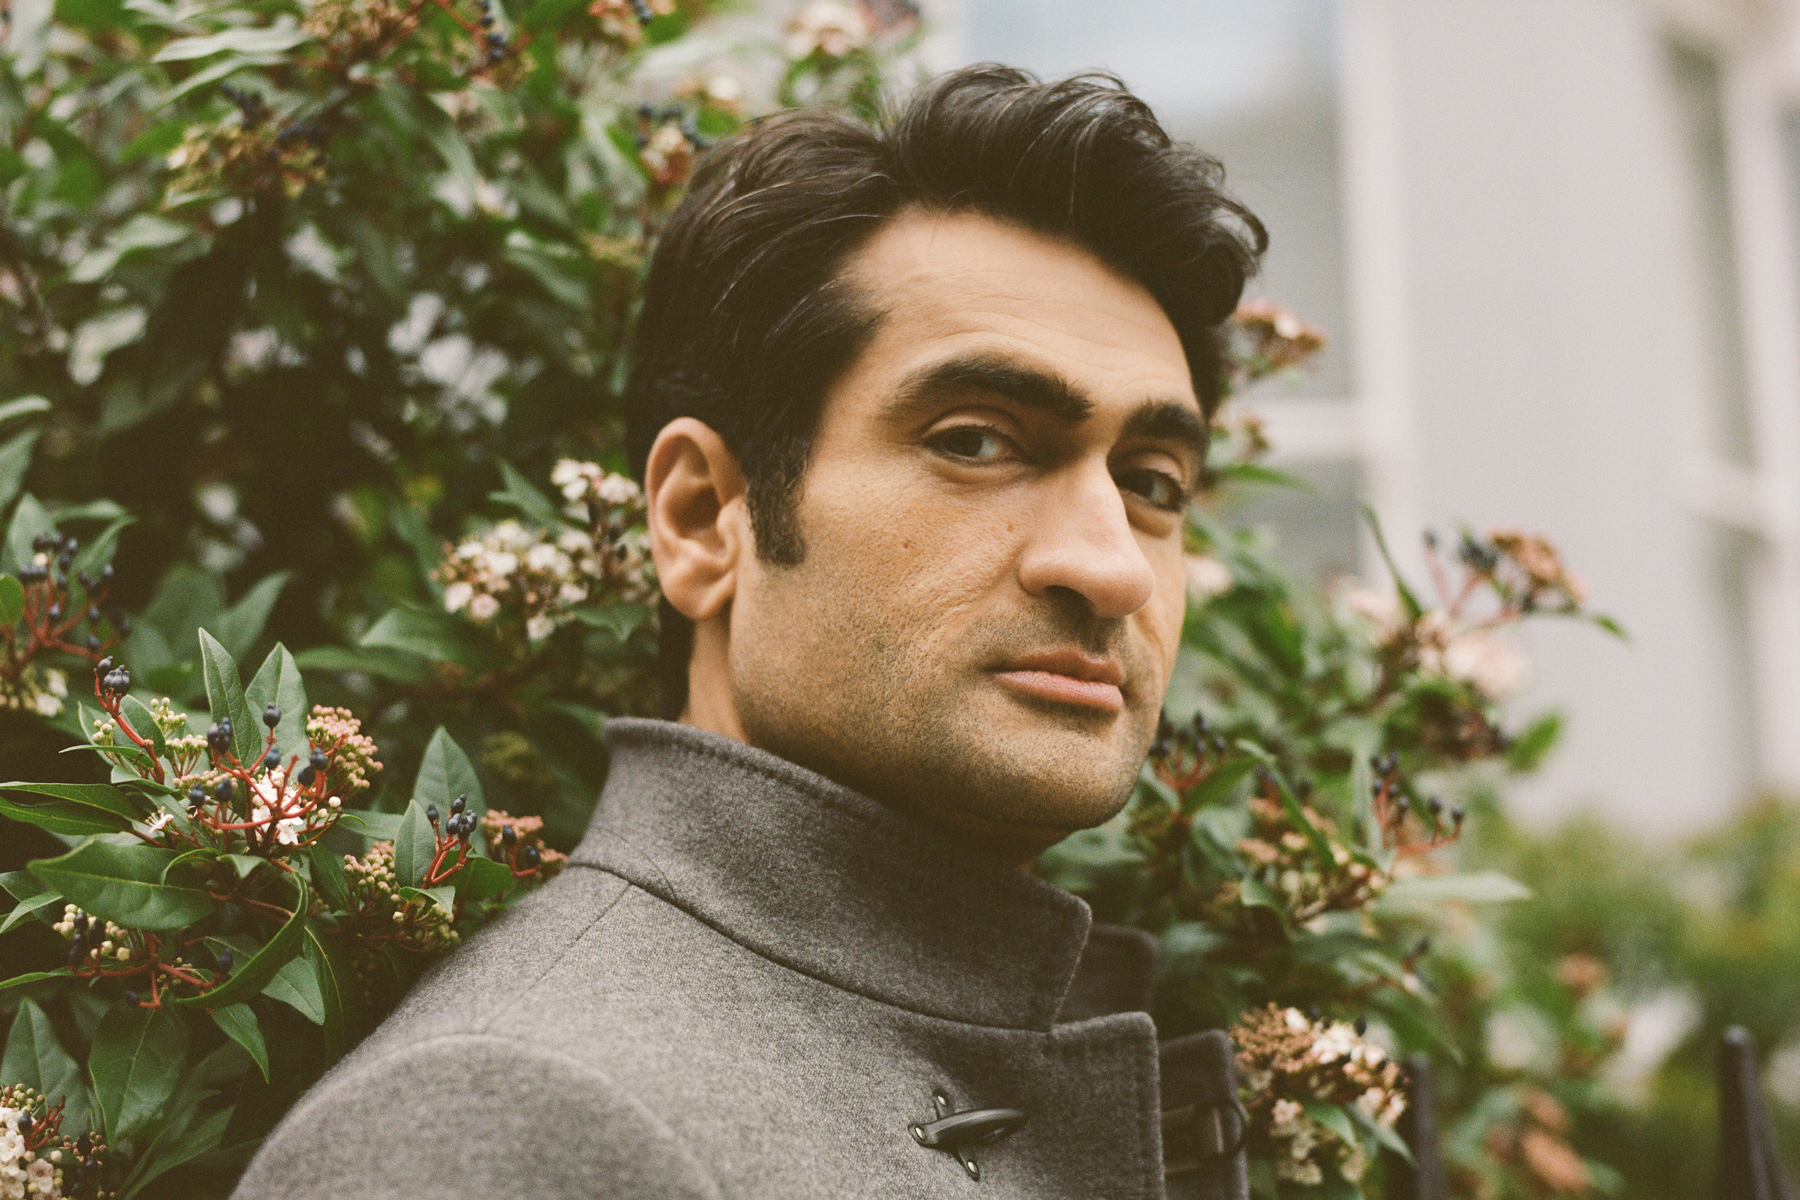 The comic and actor Kumail Nanjiani, who moved to the United States from Pakistan at 18, in London, Jan. 9, 2020. With "Little America," Nanjiani and his wife and co-creator Emily Gordon highlight immigrant narratives that buck traditional expectations focus as much on small joys and triumphs as on hardship and pain. (Ellie Smith/The New York Times)